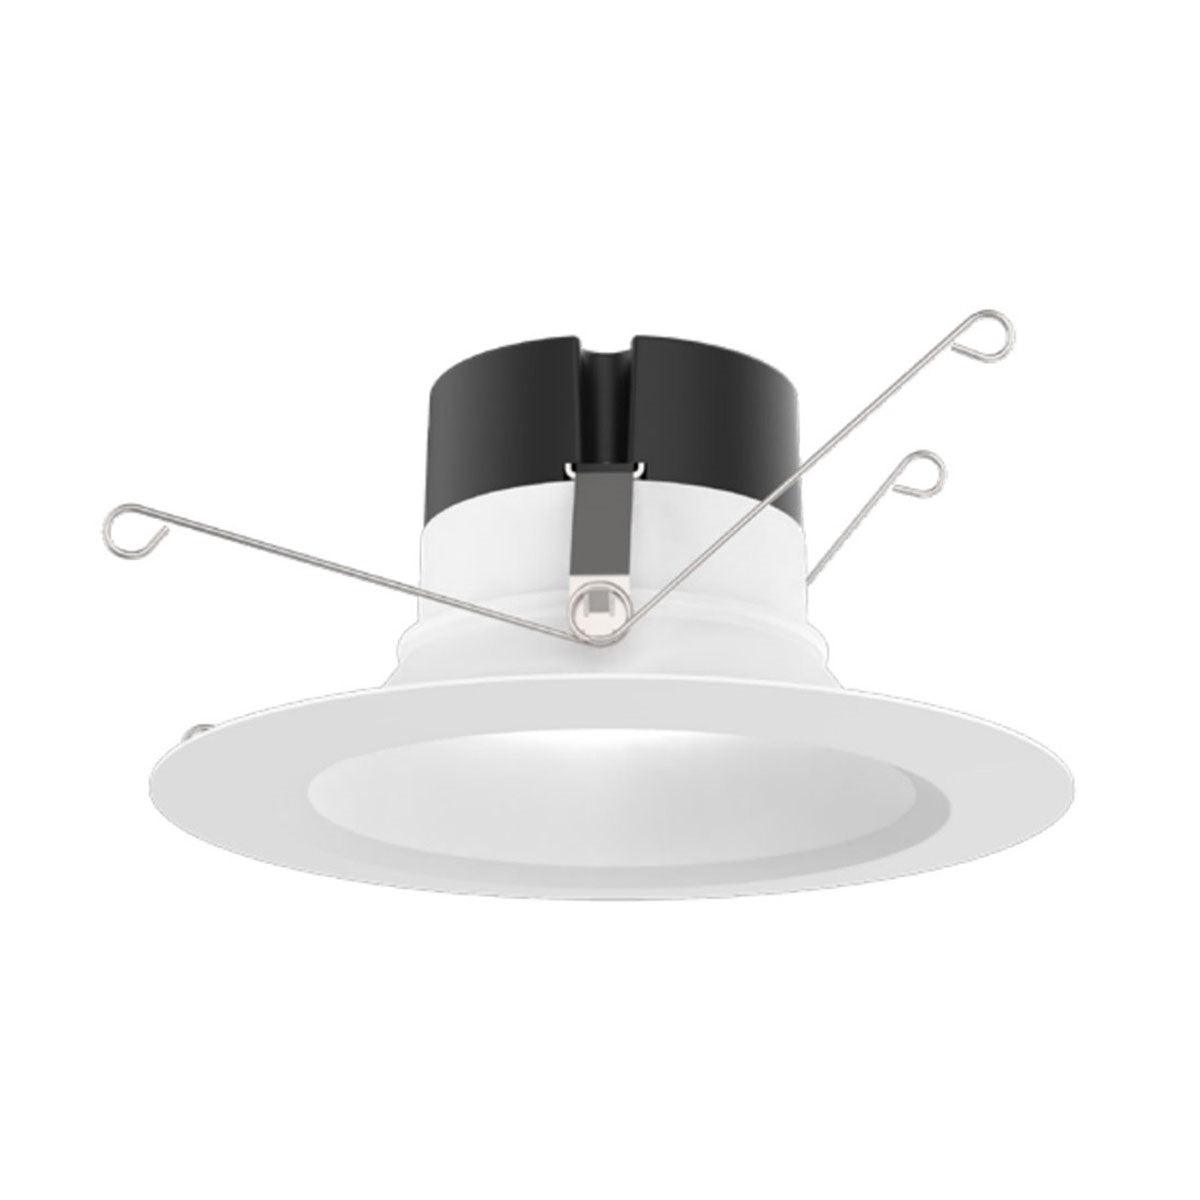 6 Inch Recessed LED Can Light, Round, 10 Watt, 900 Lumens, Selectable CCT, 2700K to 5000K, Smooth Trim